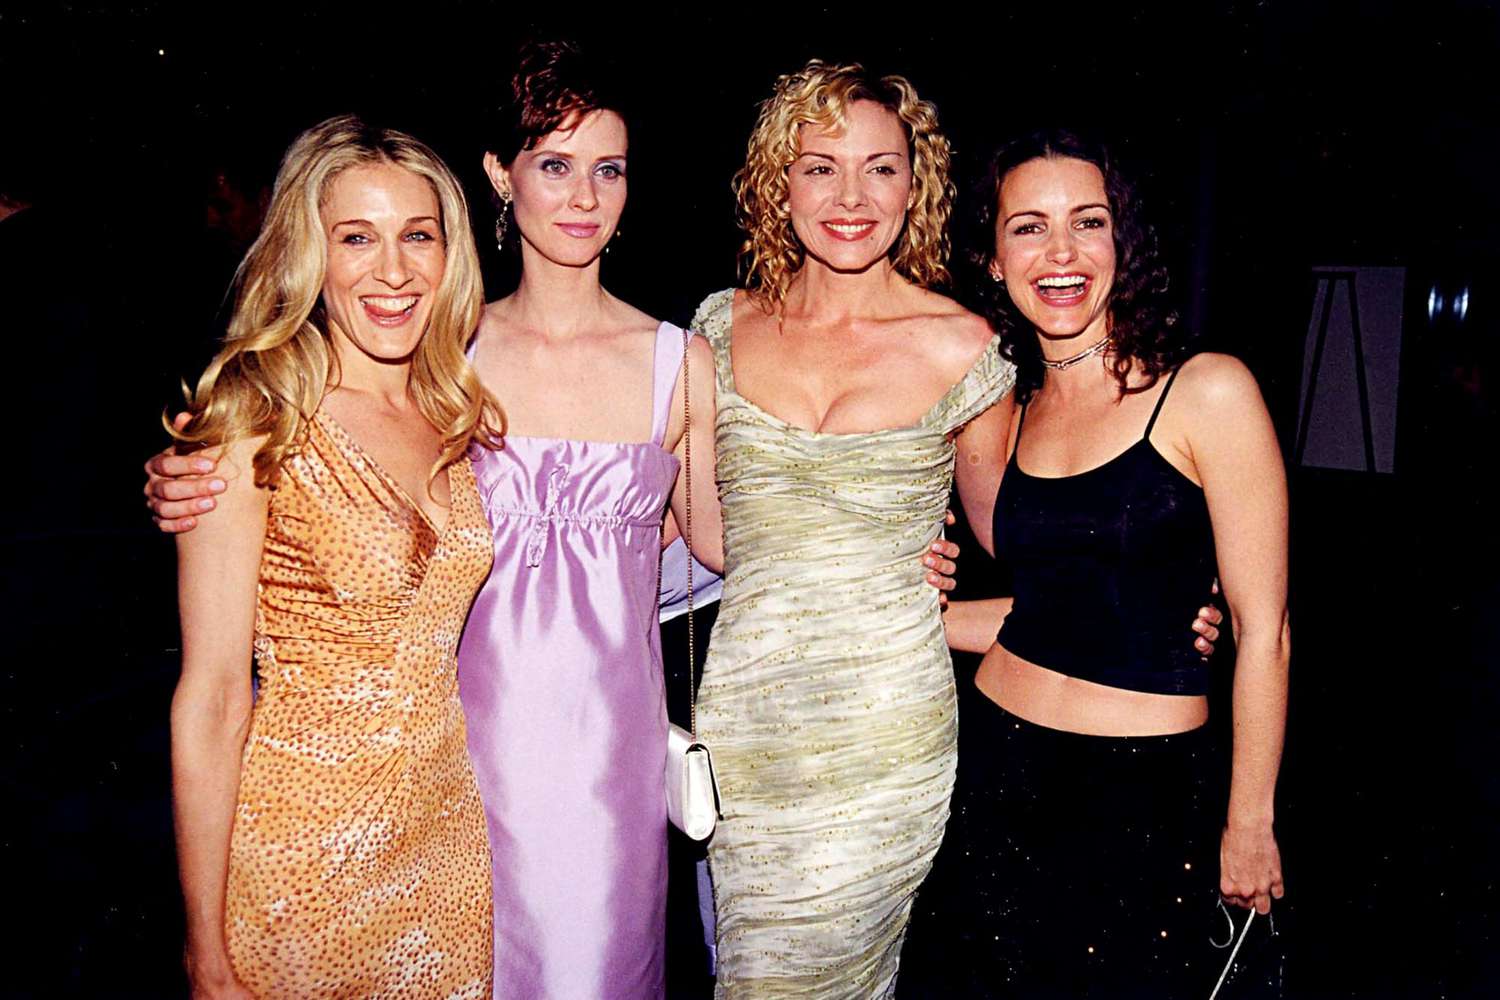 Sarah Jessica Parker, Cynthia Nixon, Kim Cattrall, and Kristin Davis at a Party for Sex and the City in Los Angeles in 1999